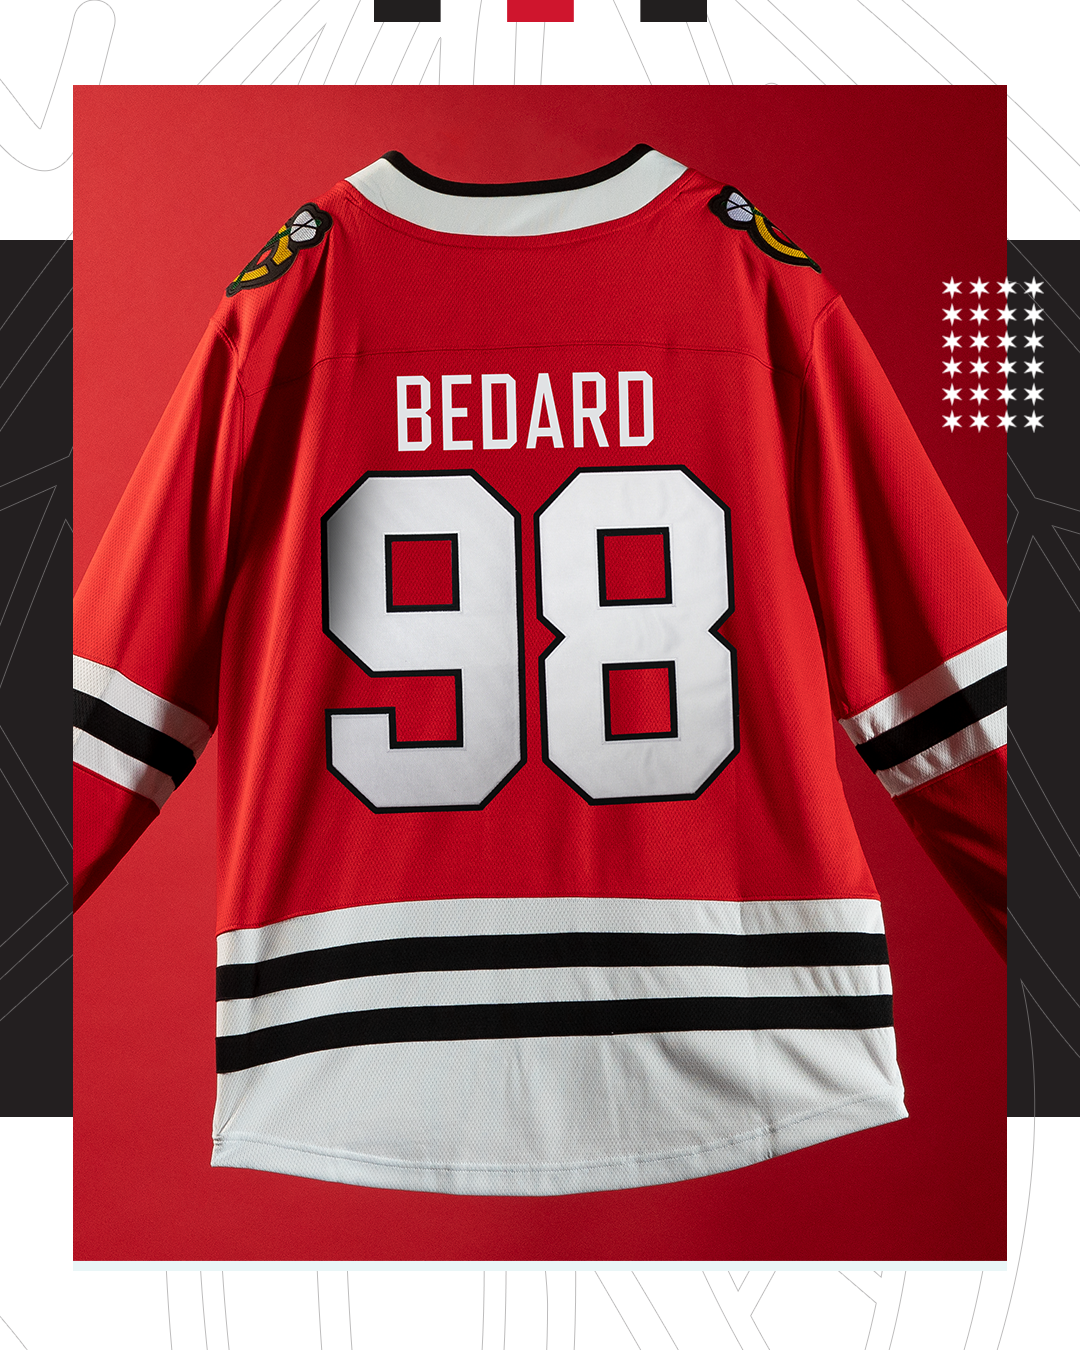 Blackhawks announced their 'reverse retro' jersey schedule for